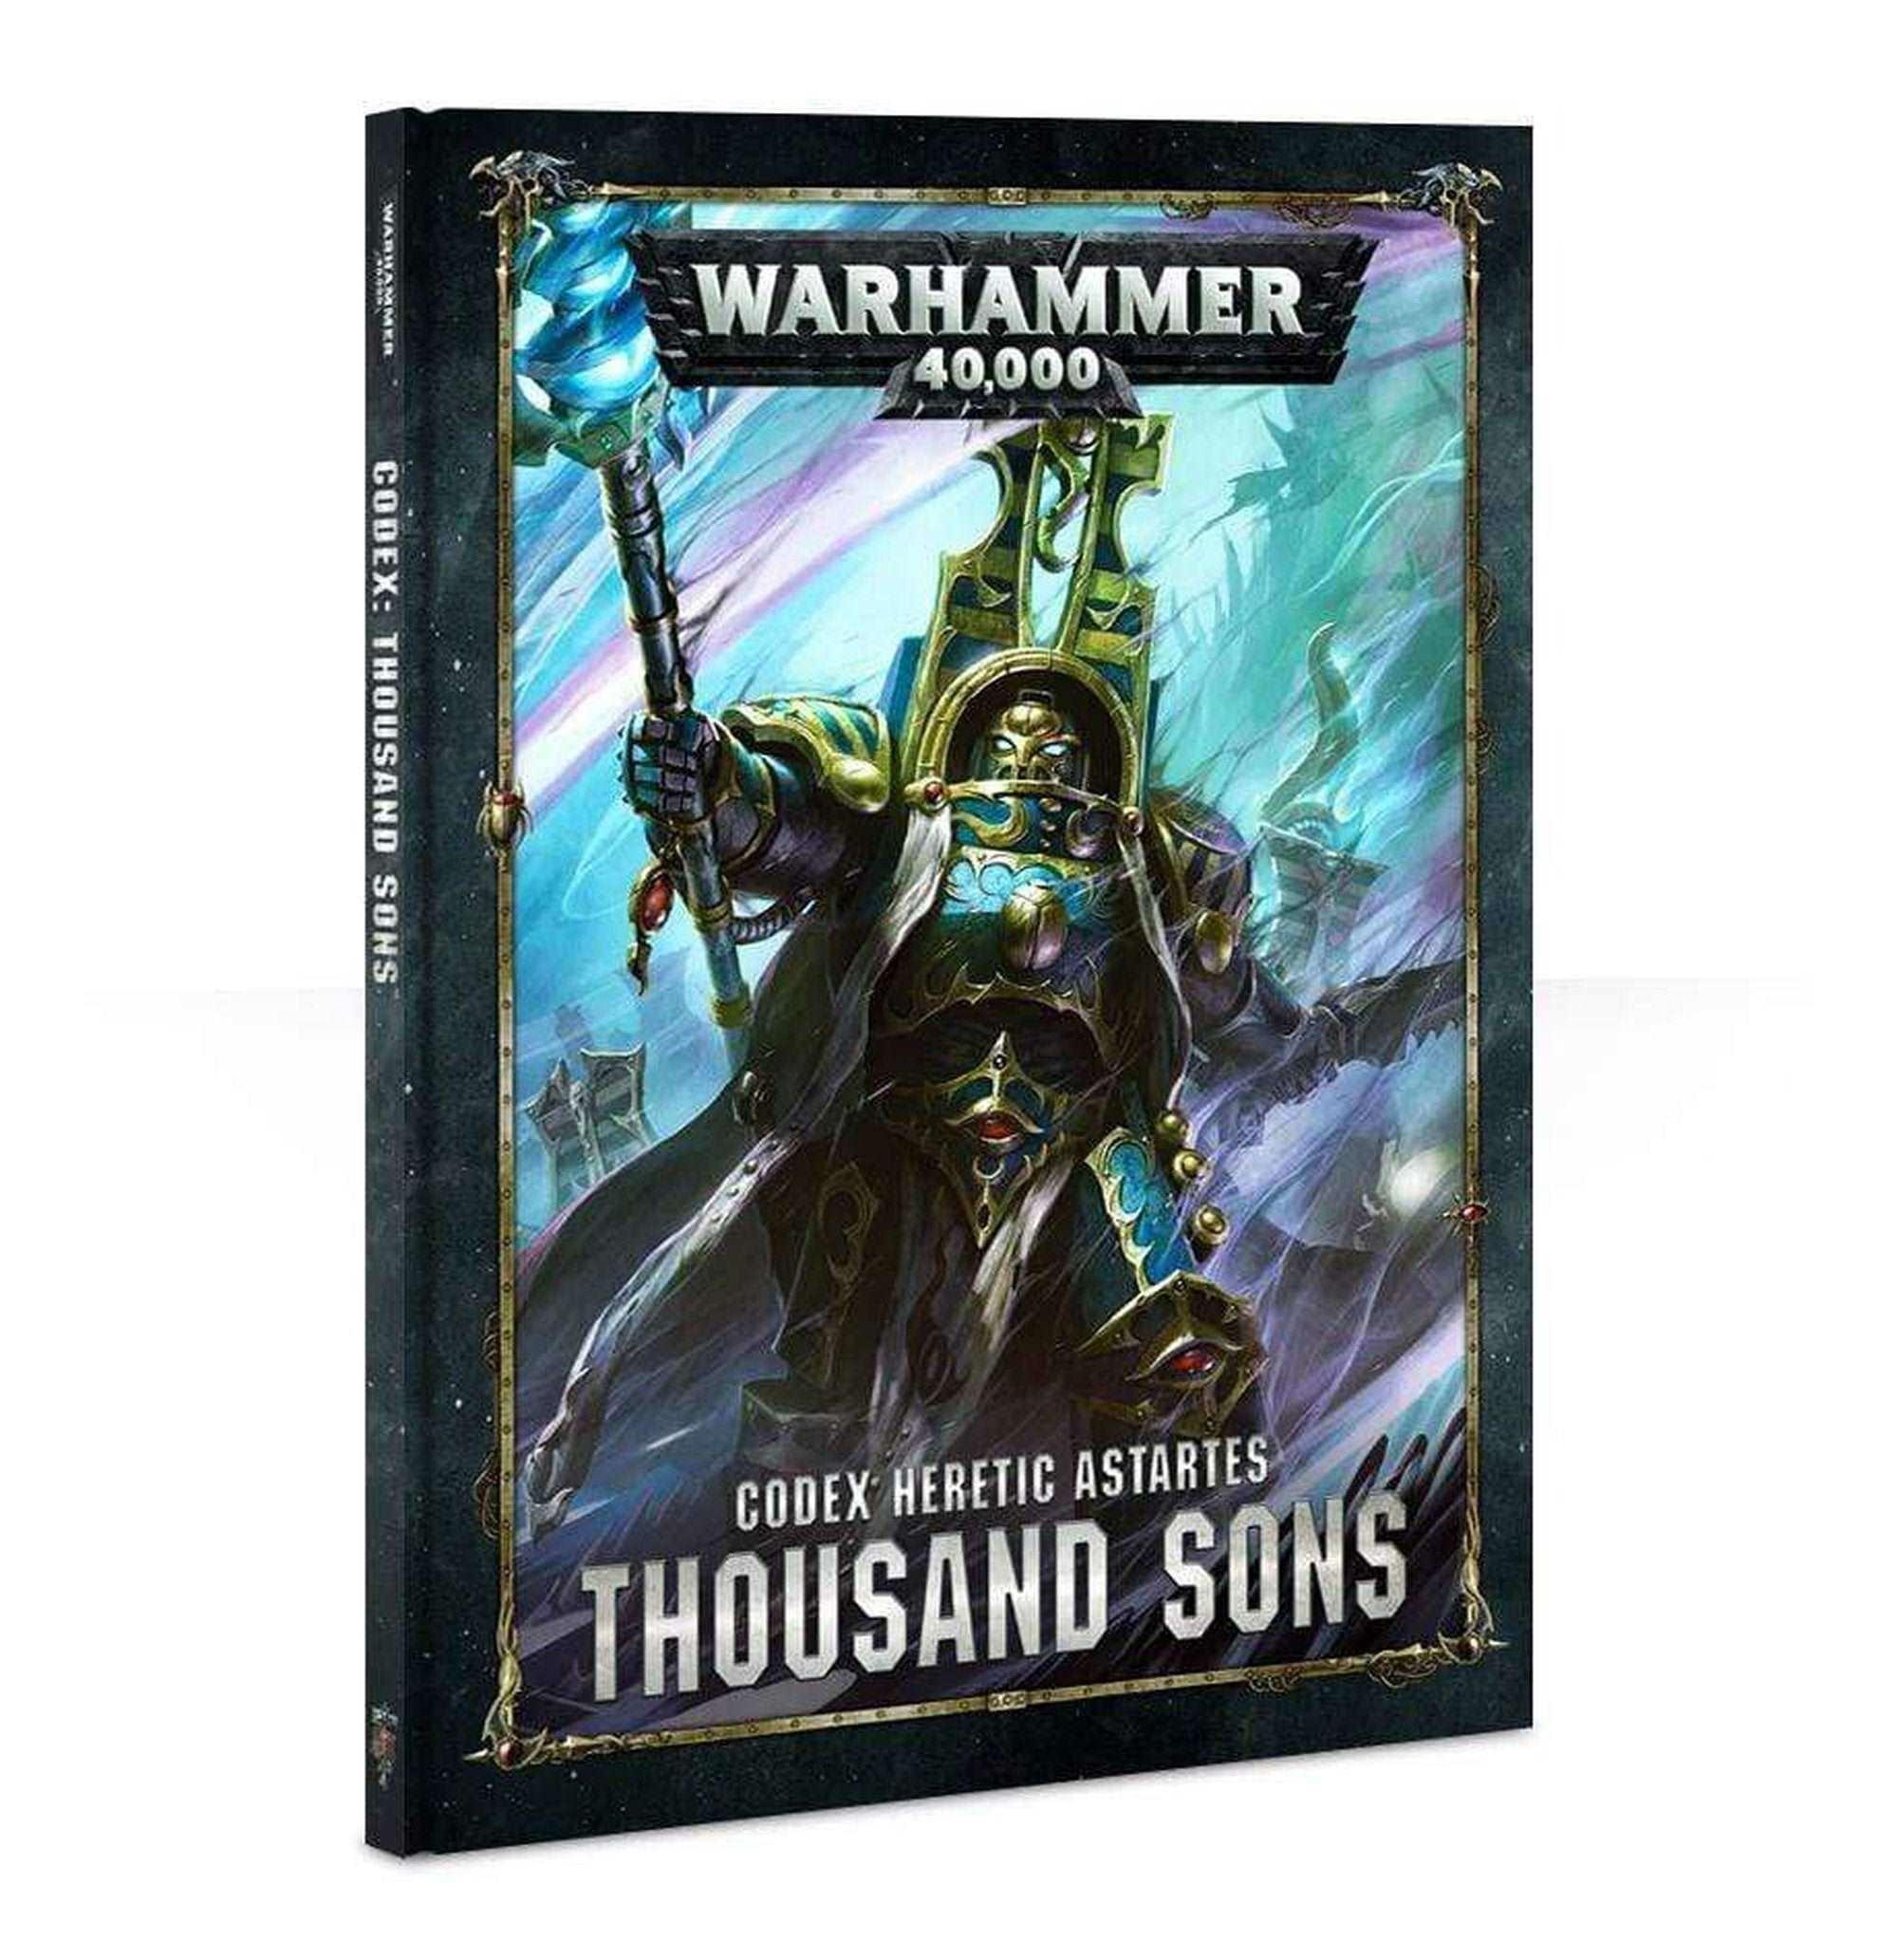 Warhammer 40,000: Thousand Sons Poster Poster / N/A / Landscape, 18 x 12 Inches